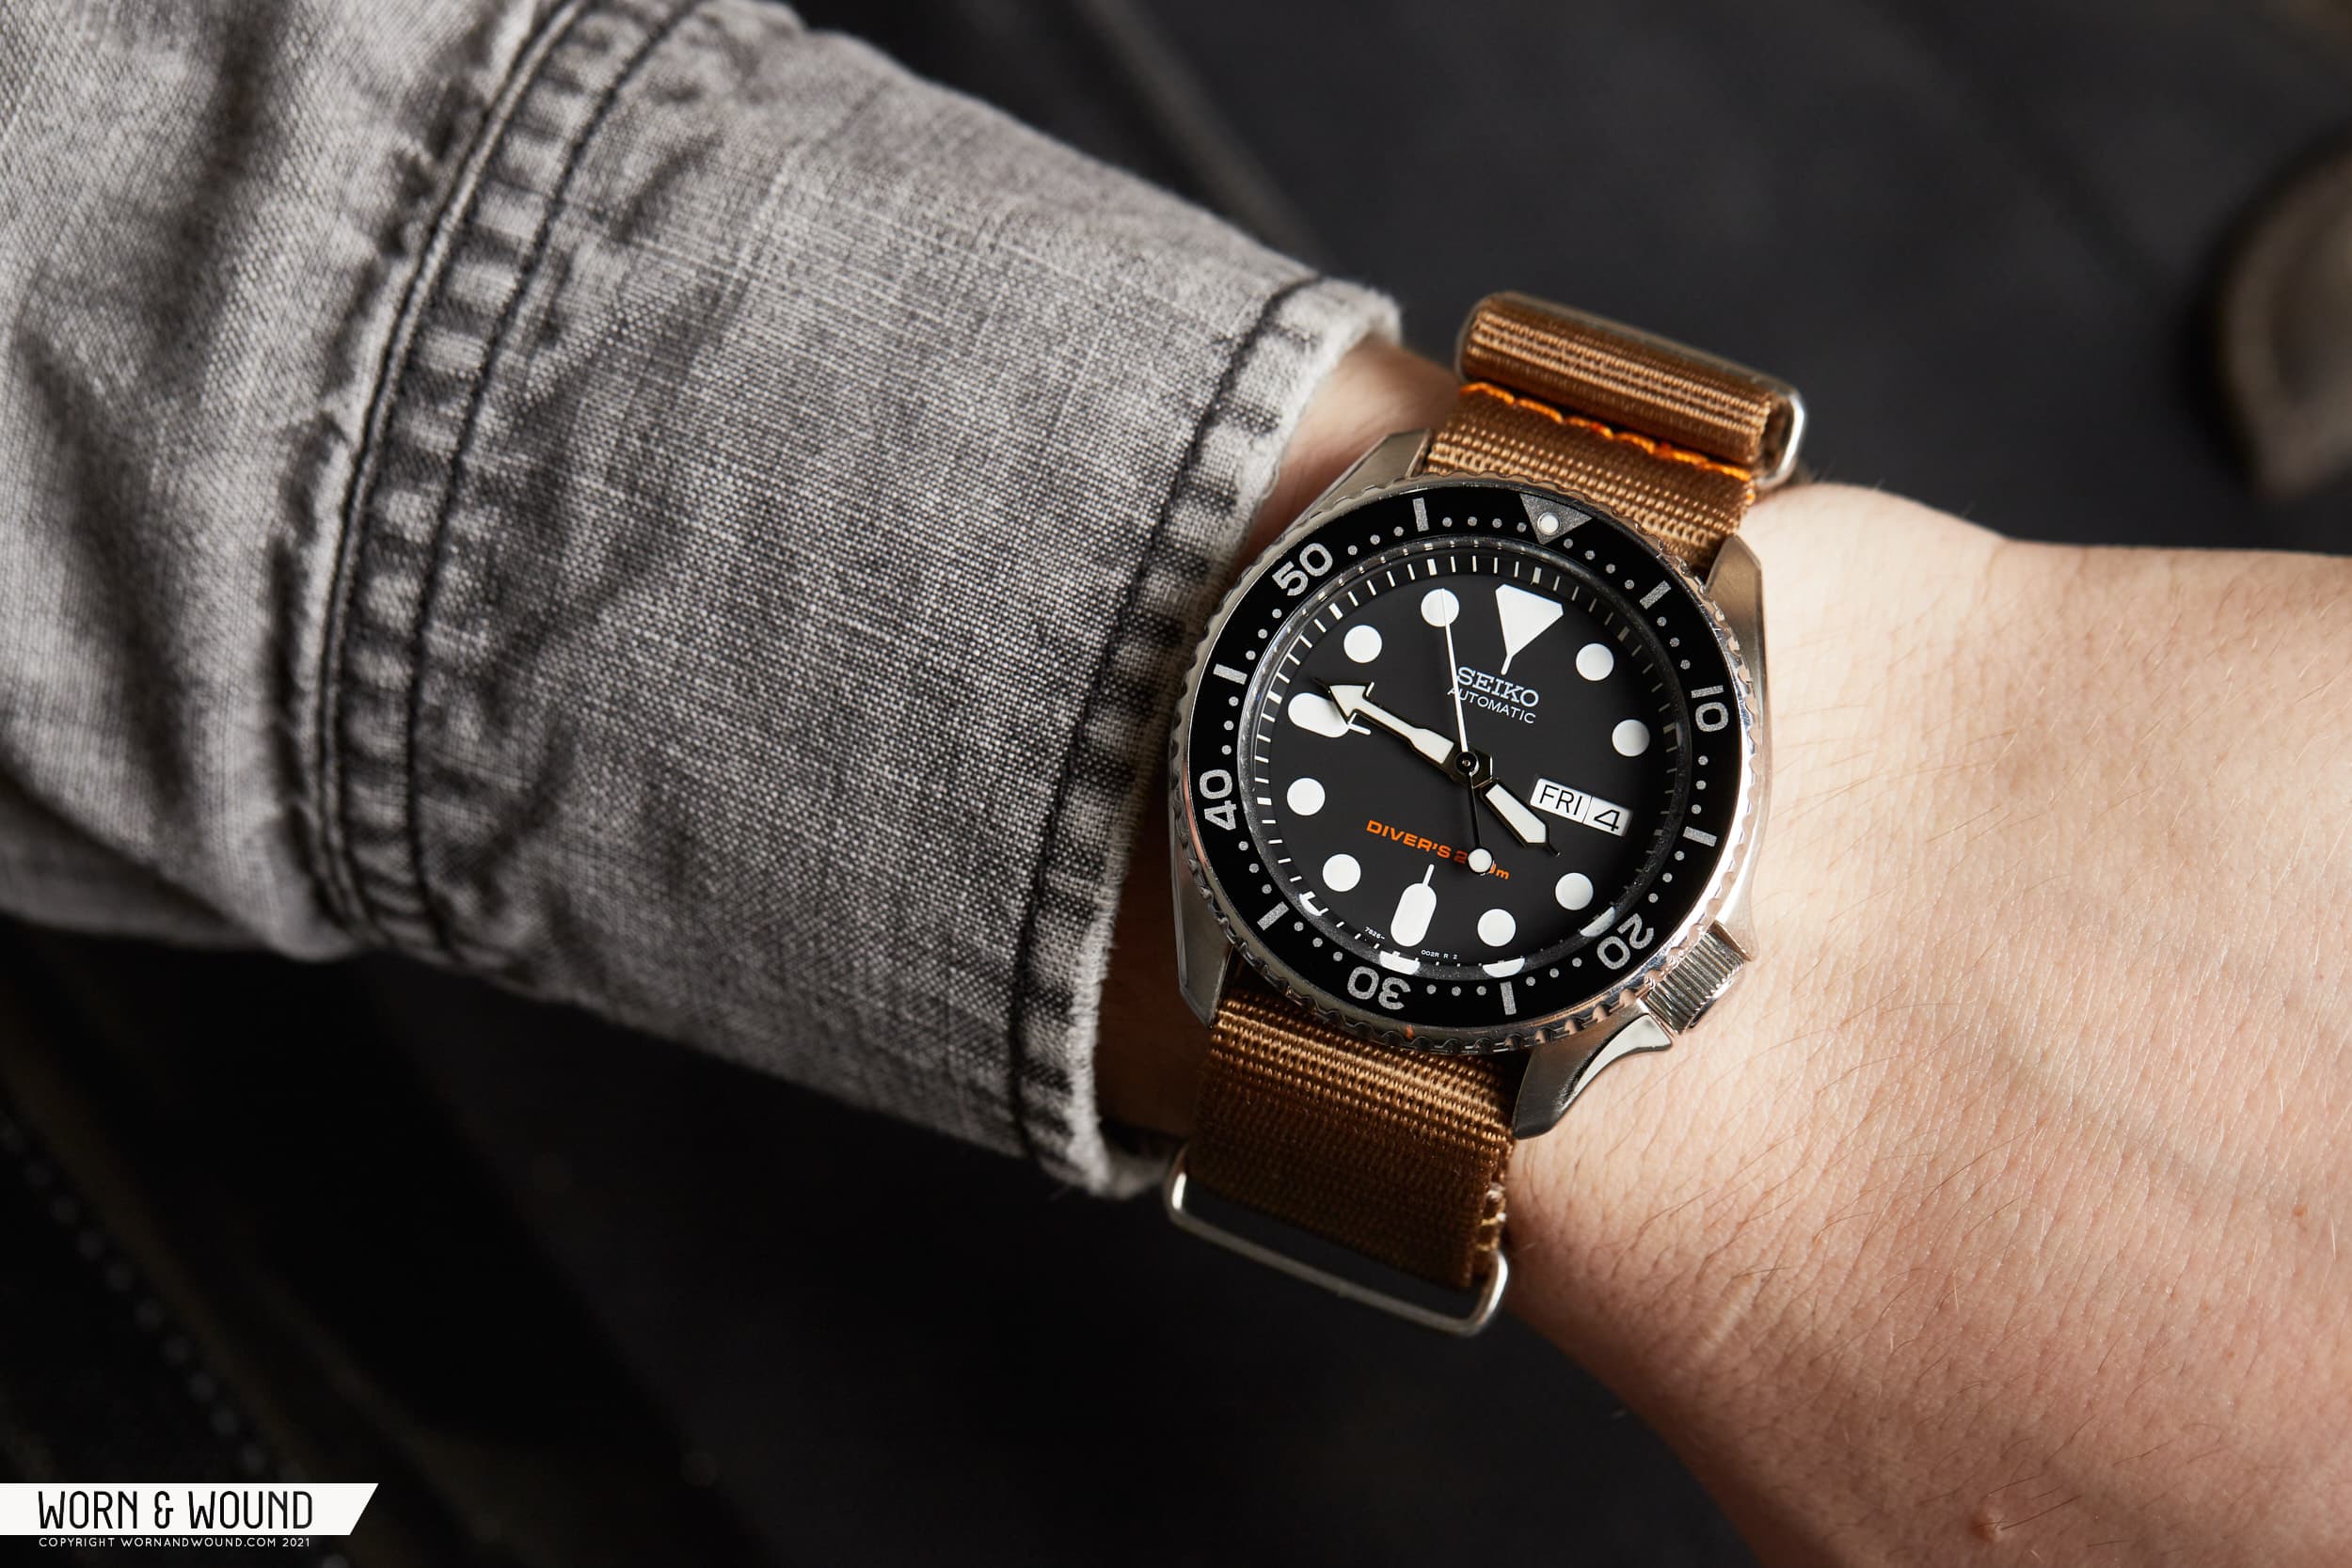 10 Years Later: The Seiko SKX007 As Seen By The W&W Editors - Worn